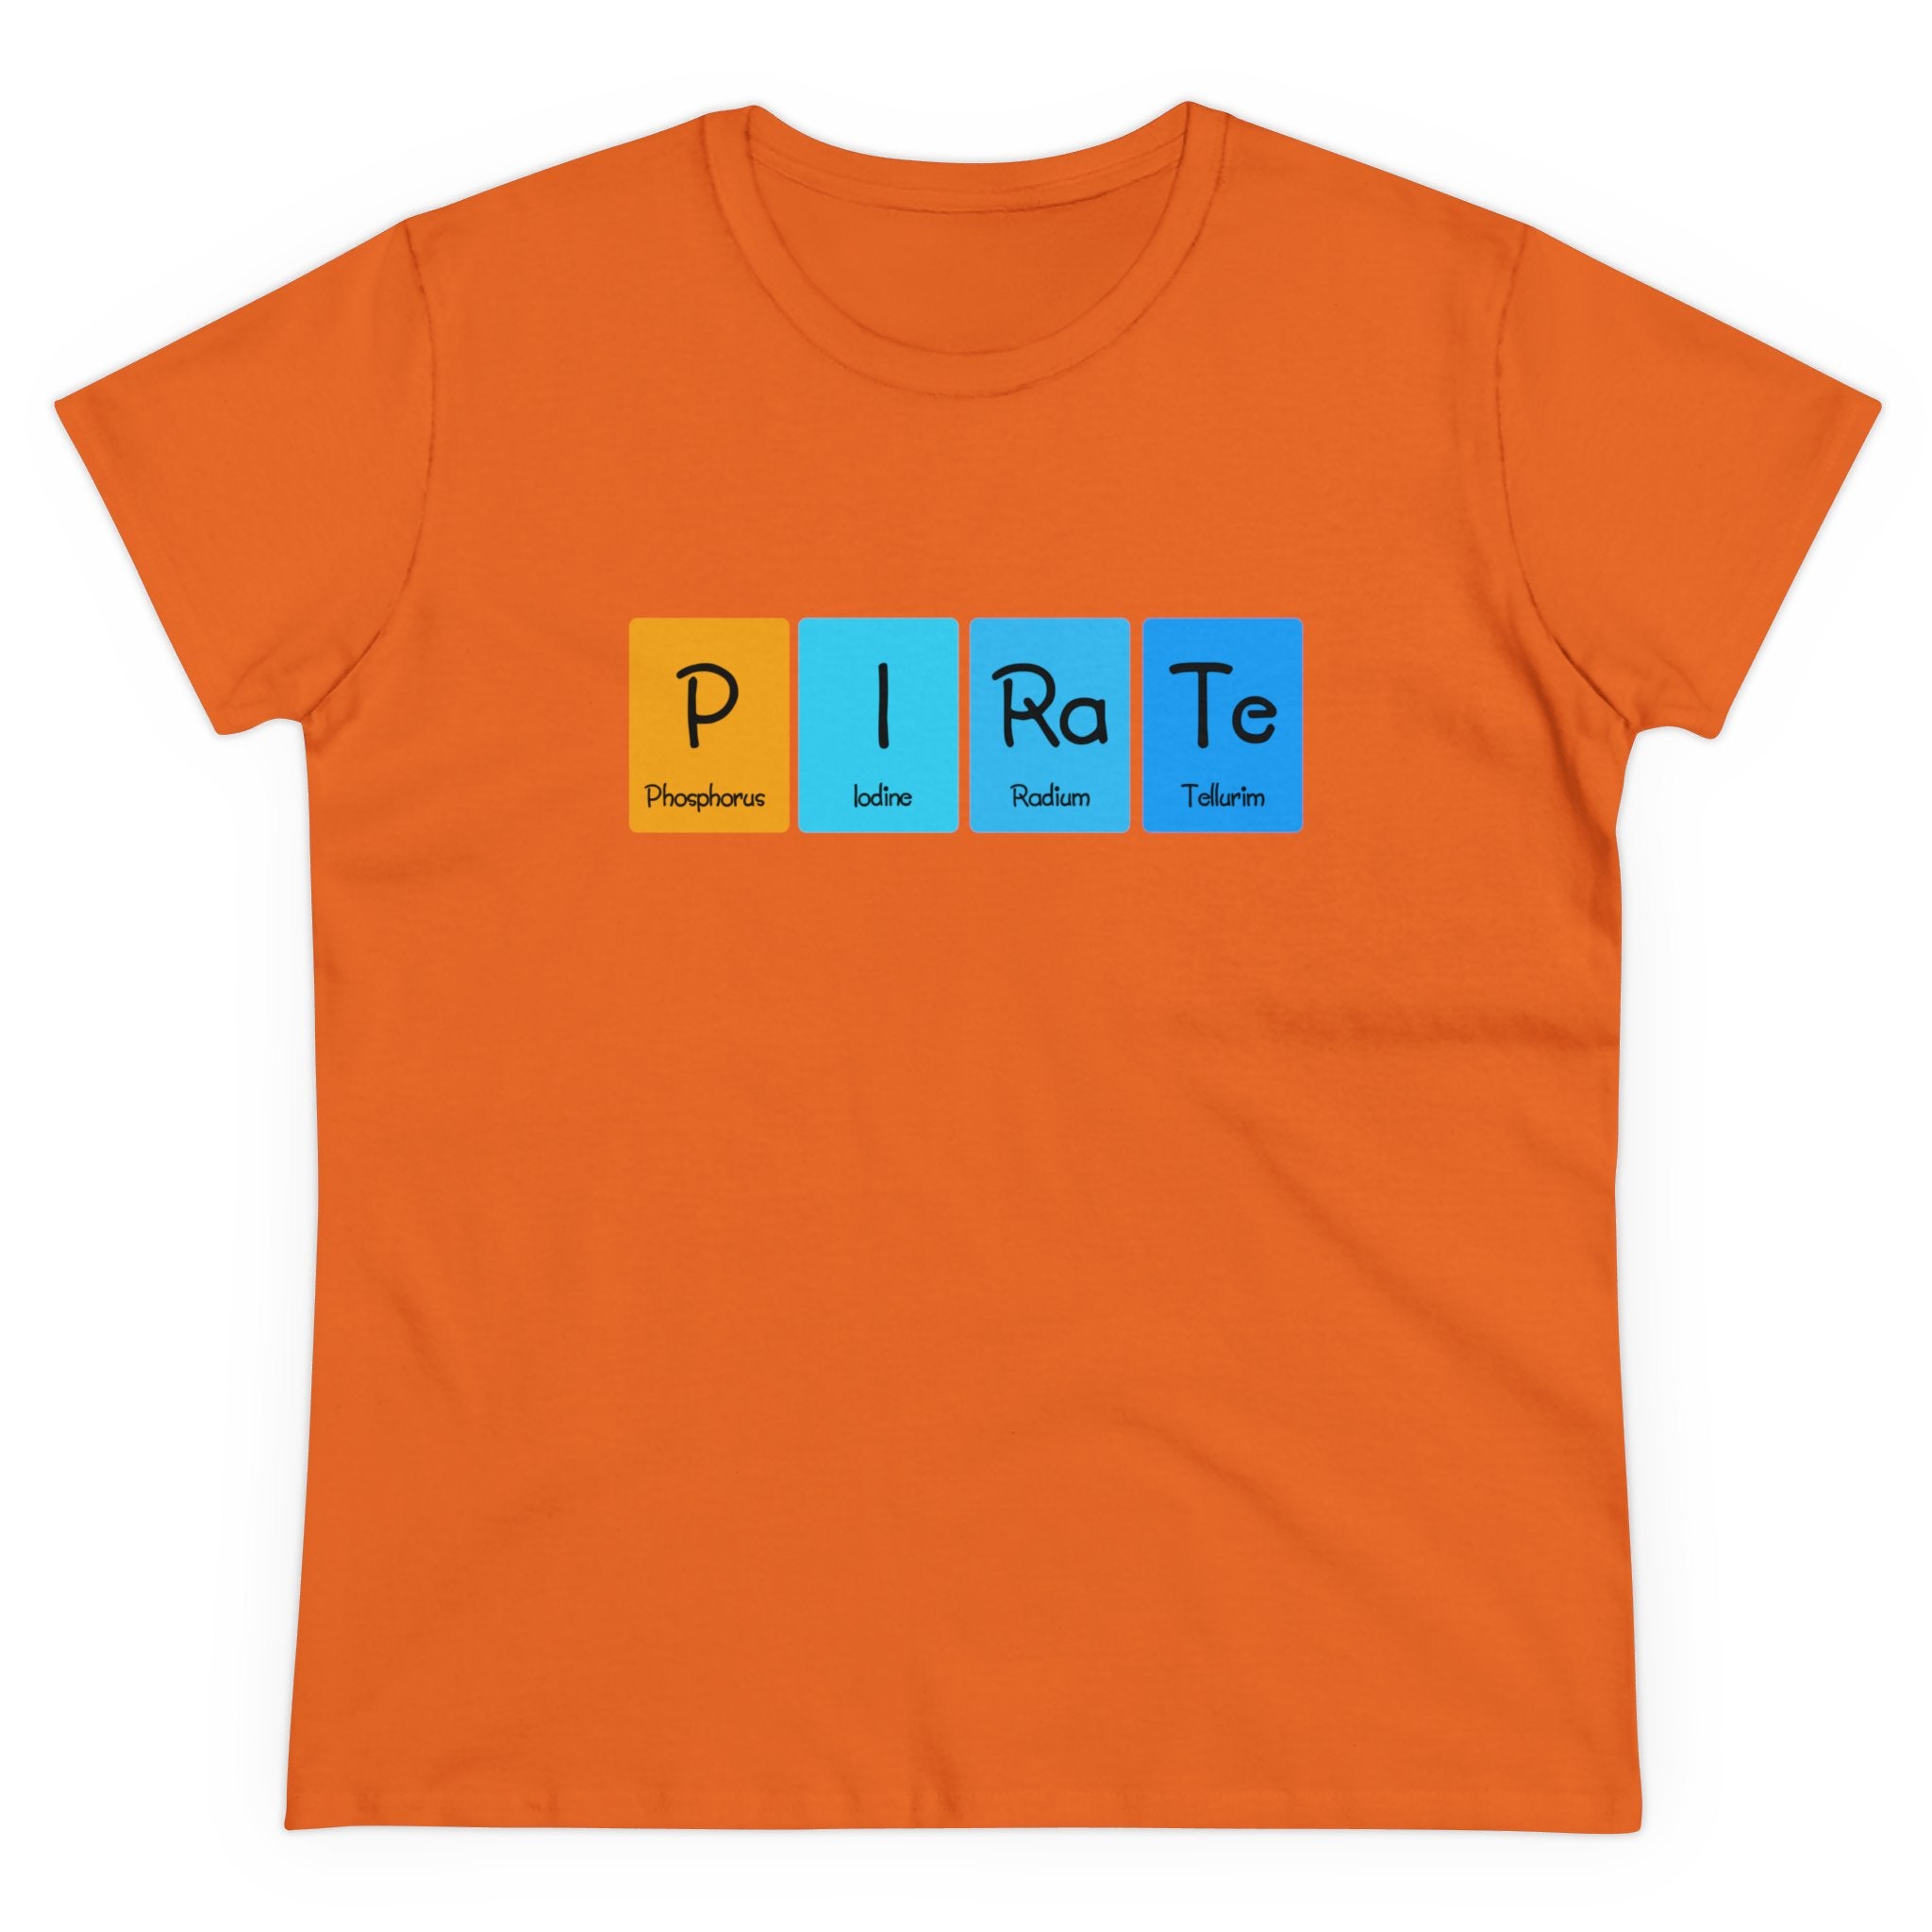 A trendy, bright orange P-I-Ra-Te - Women's Tee features the word "PIRATE" spelled out using colorful periodic table element blocks: Phosphorus (P), Iodine (I), Radium (Ra), and Tellurium (Te). Made from ethically grown cotton, this shirt combines style with sustainability.